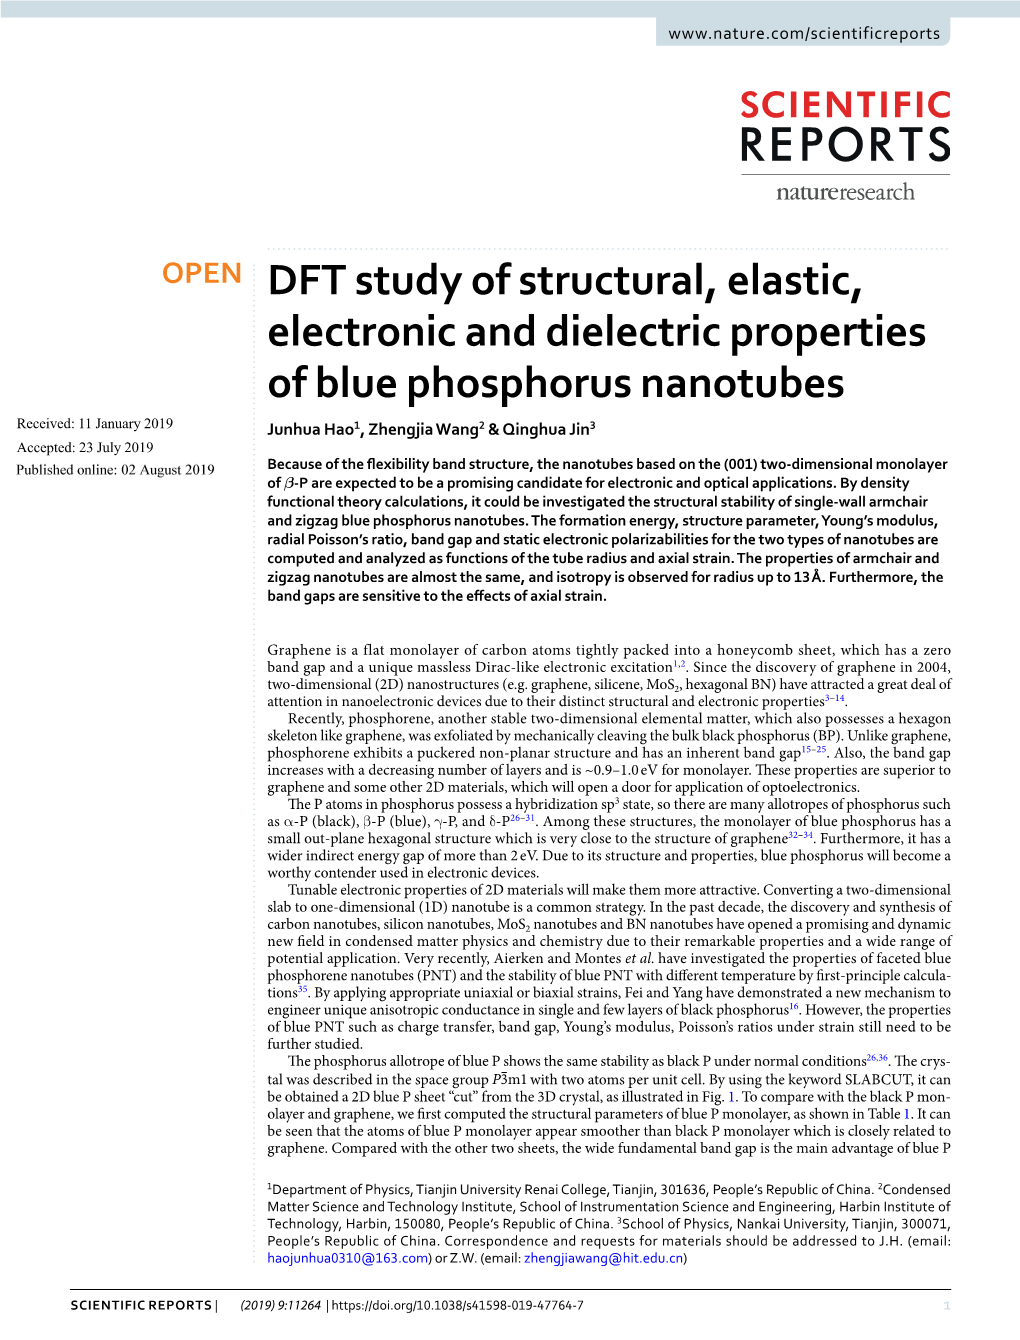 DFT Study of Structural, Elastic, Electronic and Dielectric Properties